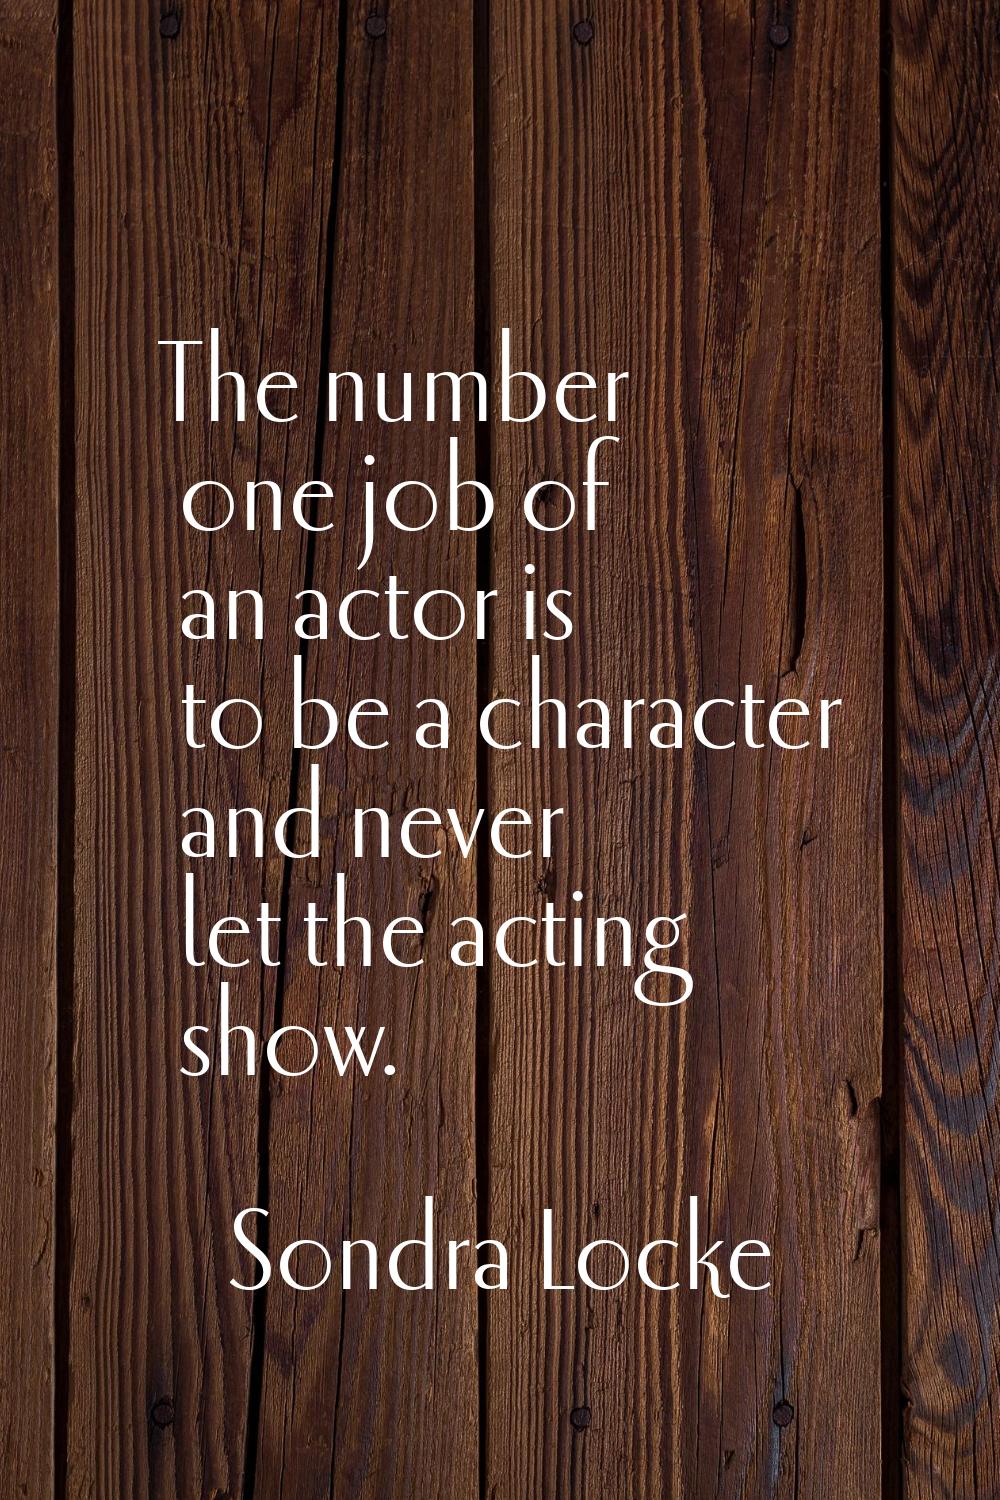 The number one job of an actor is to be a character and never let the acting show.